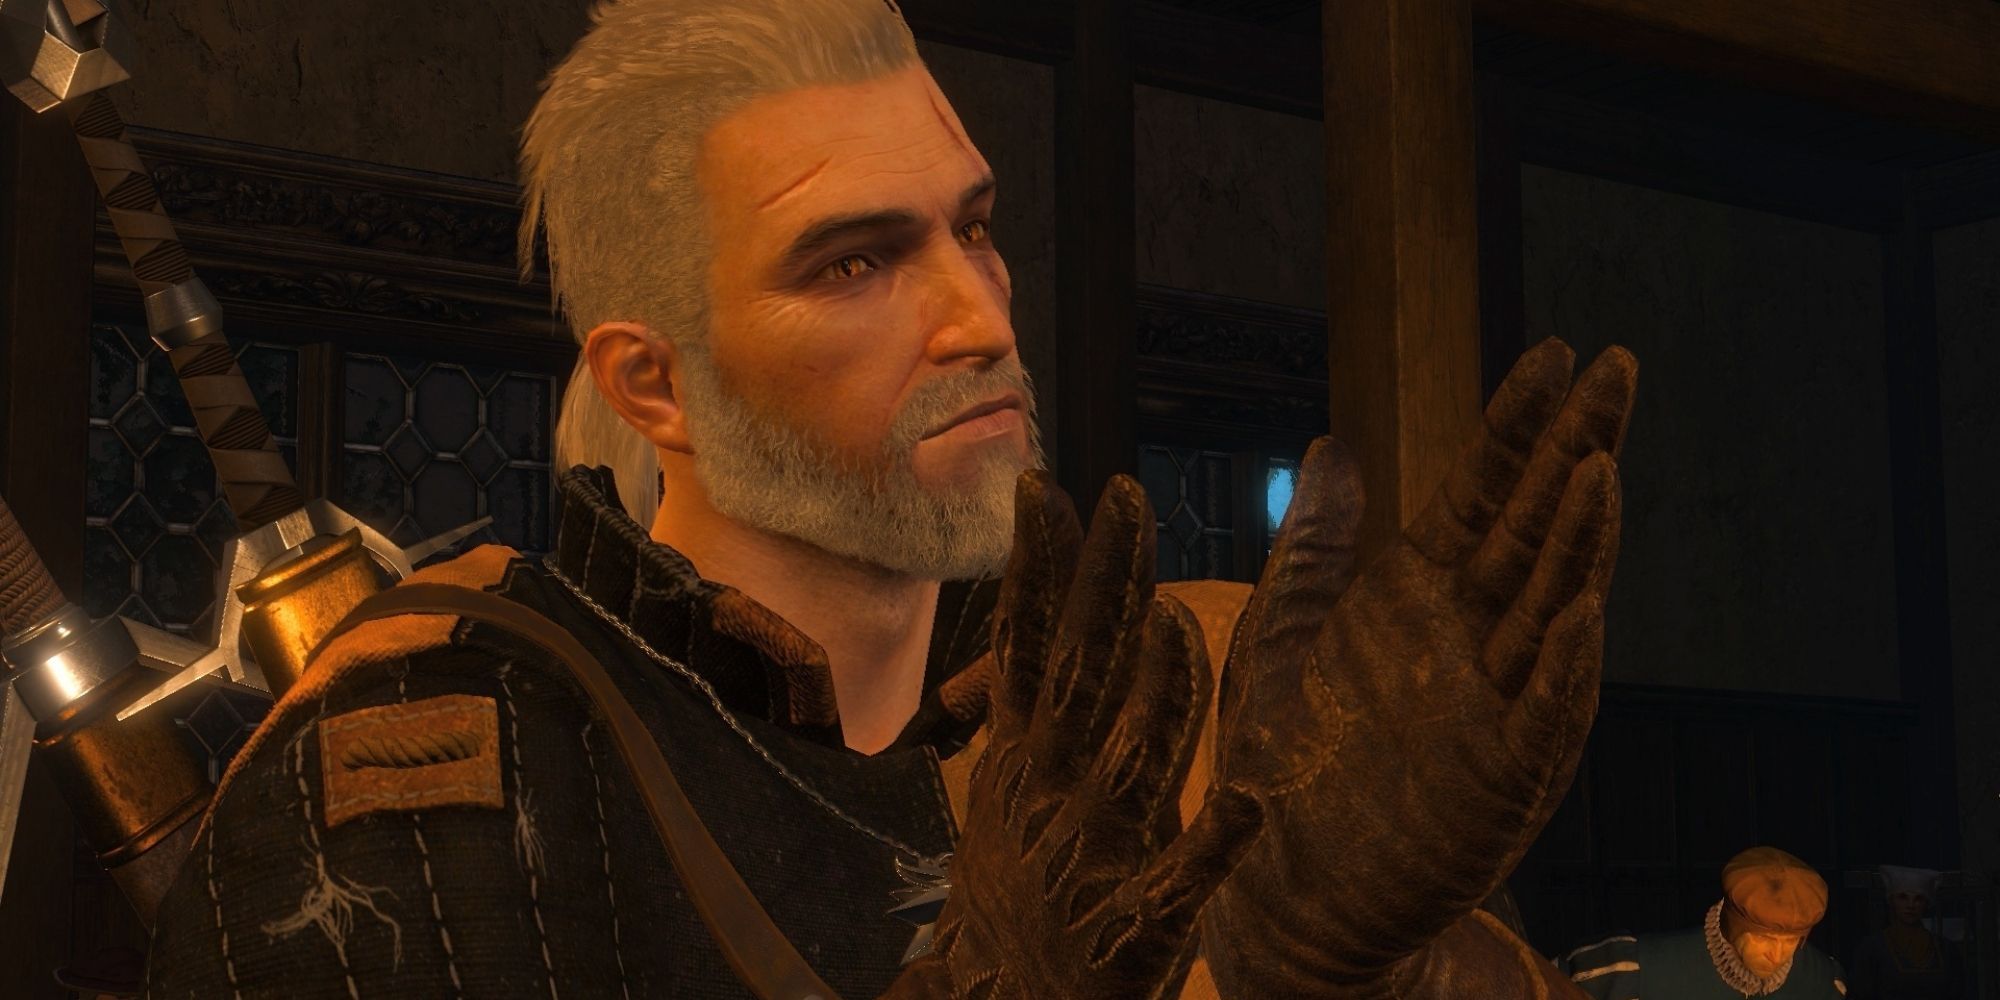 Can I get a higher ponytail, like in the cover art? : r/Witcher3